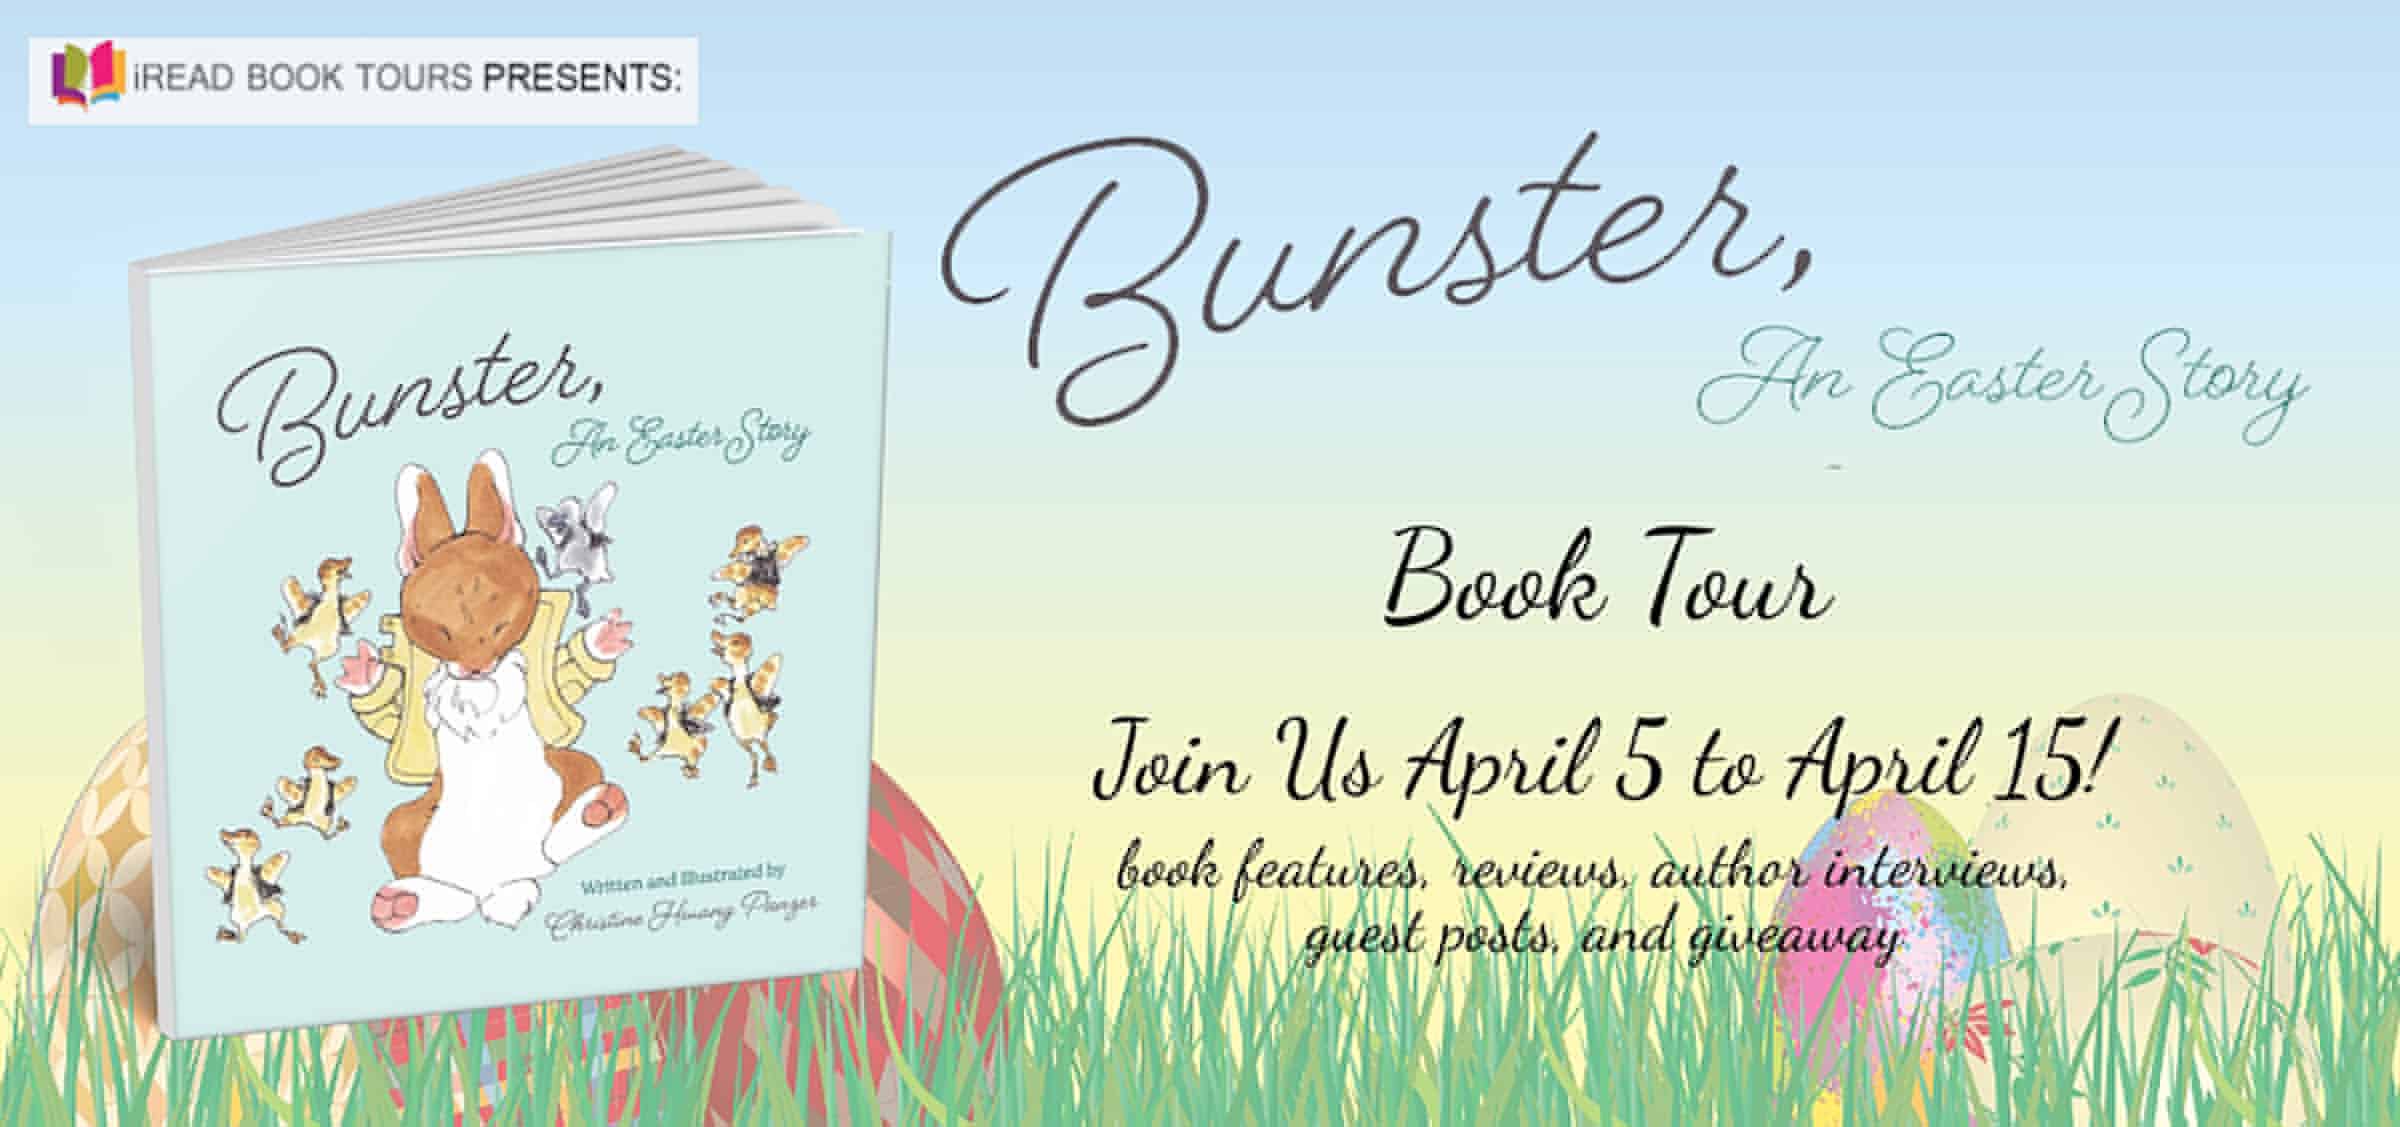 Bunster, An Easter Story by Christine Hwang Panzer | Giveaway (1 Winner) ~ Review | #Children's #BoardBook #Friendship